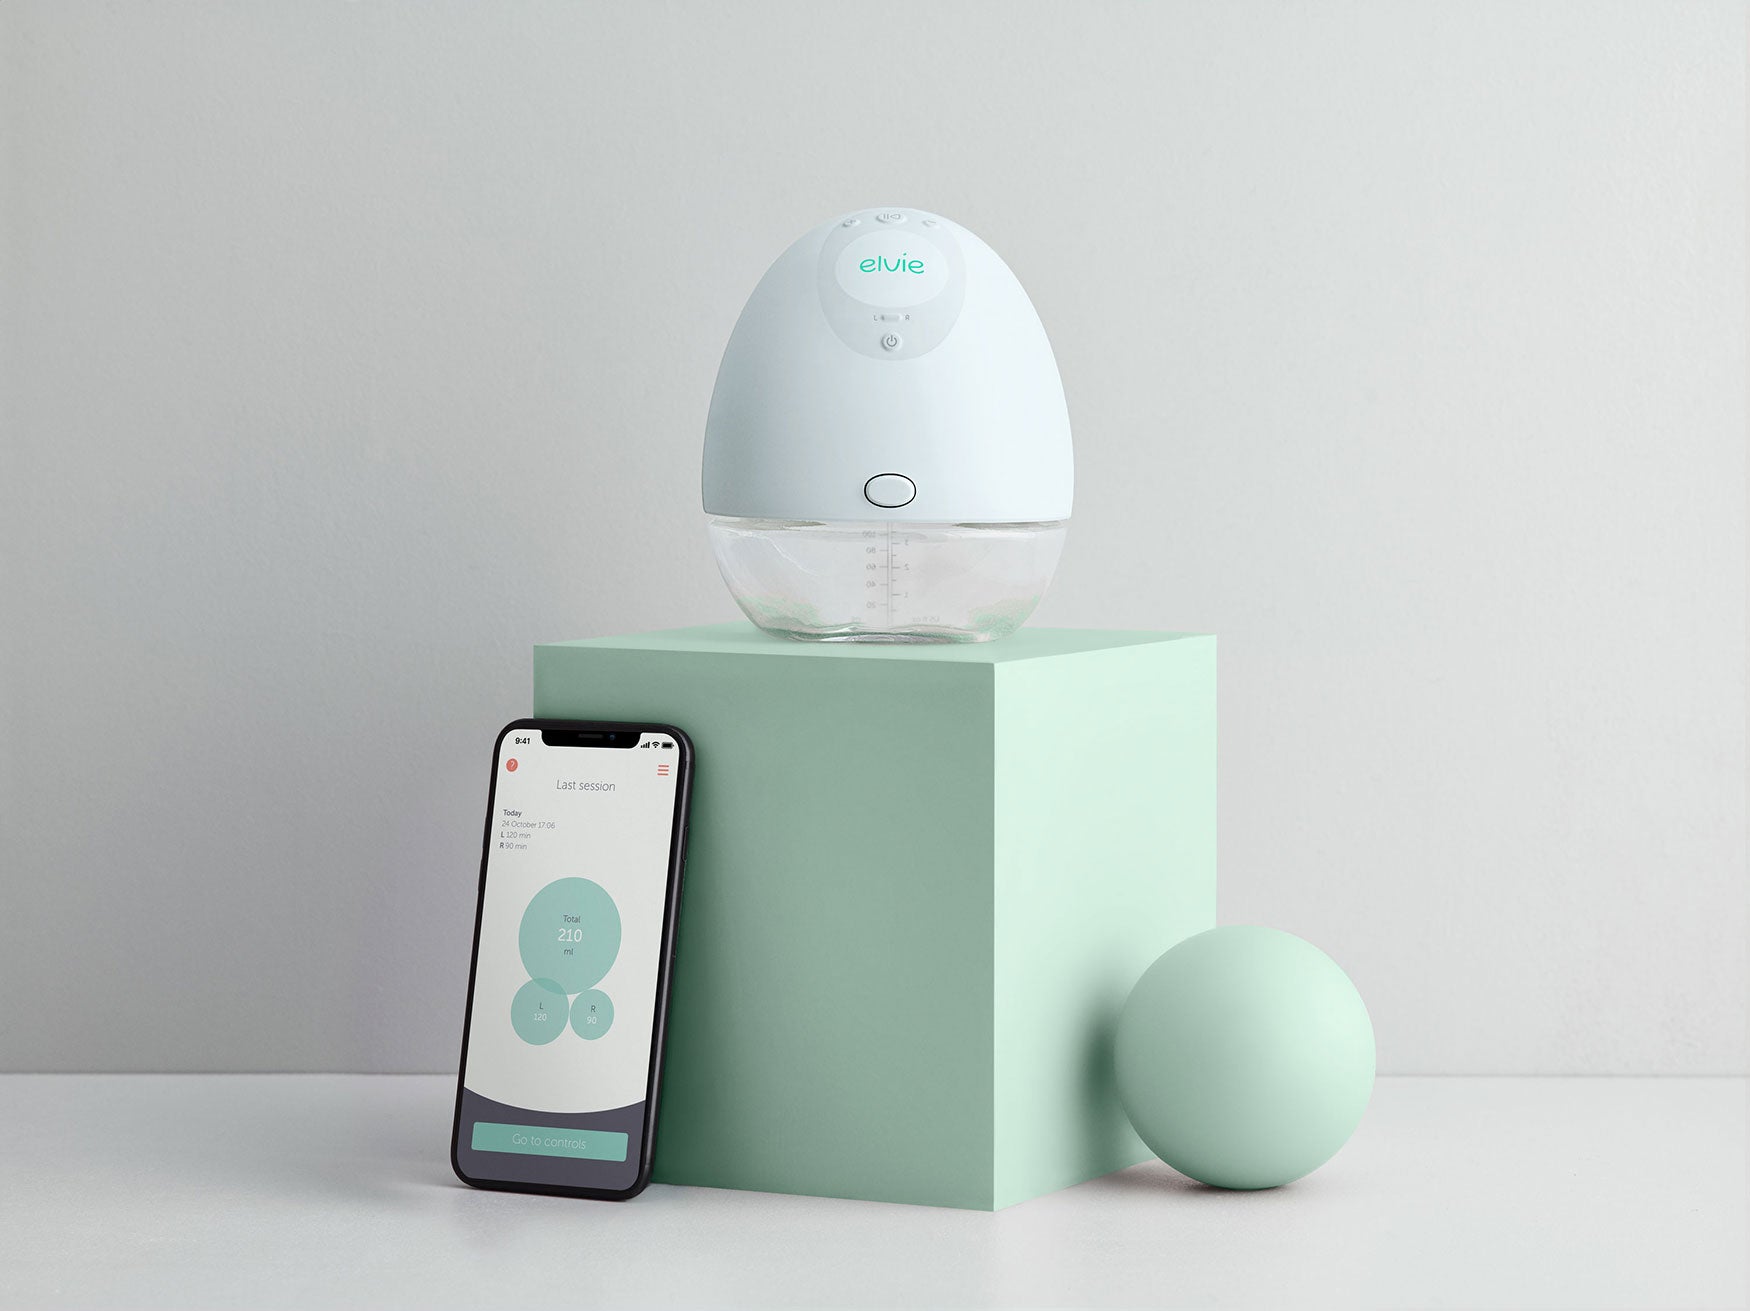 I Tried the Elvie Wearable Breast Pump, Review